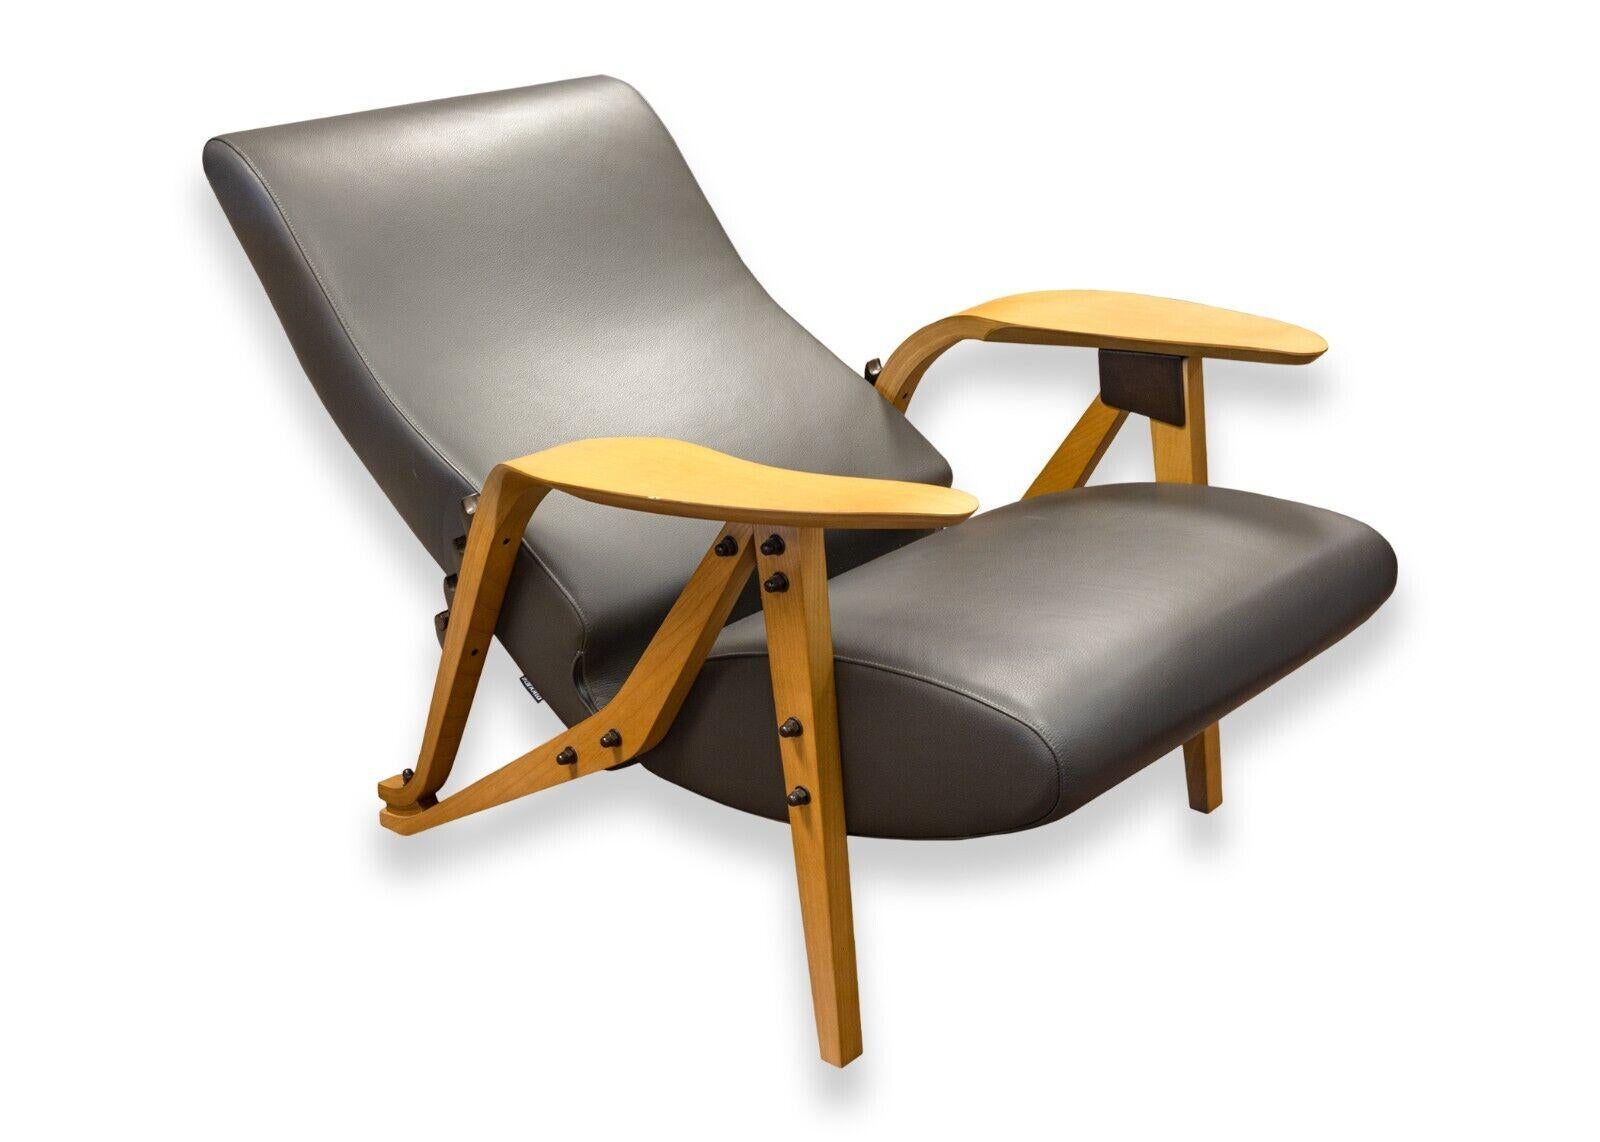 A Carlo Mollino contemporary modern grey leather Gilda lounge chair by Zanotta. A super gorgeous and unique contemporary lounge chair. This super cool accent chair features a wood frame with exposed hardware, a super luscious grey leather seat and